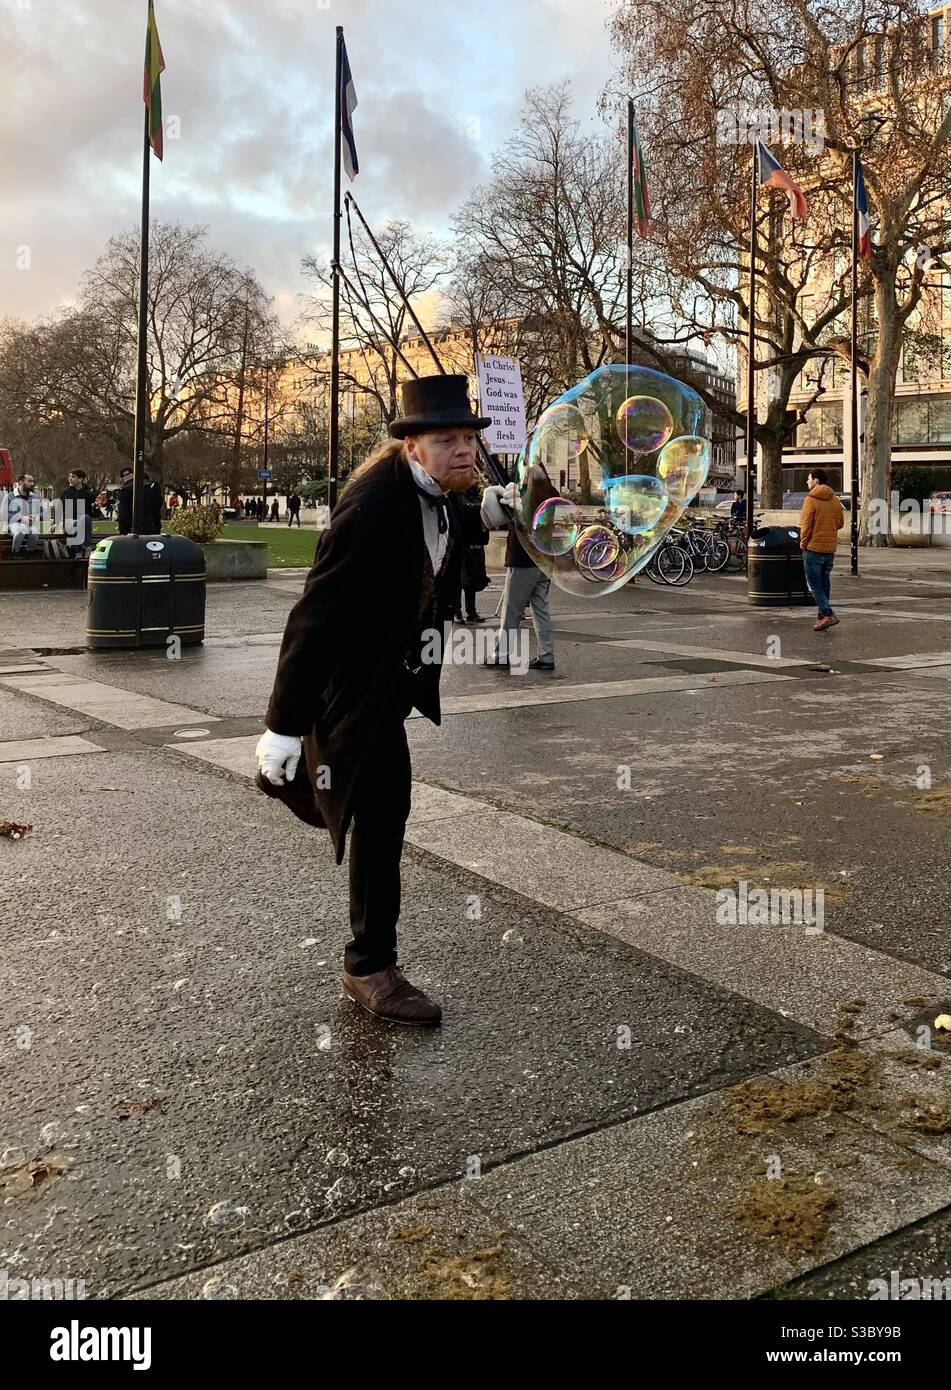 Man blowing bubbles within bubbles at Marble Arch London Stock Photo